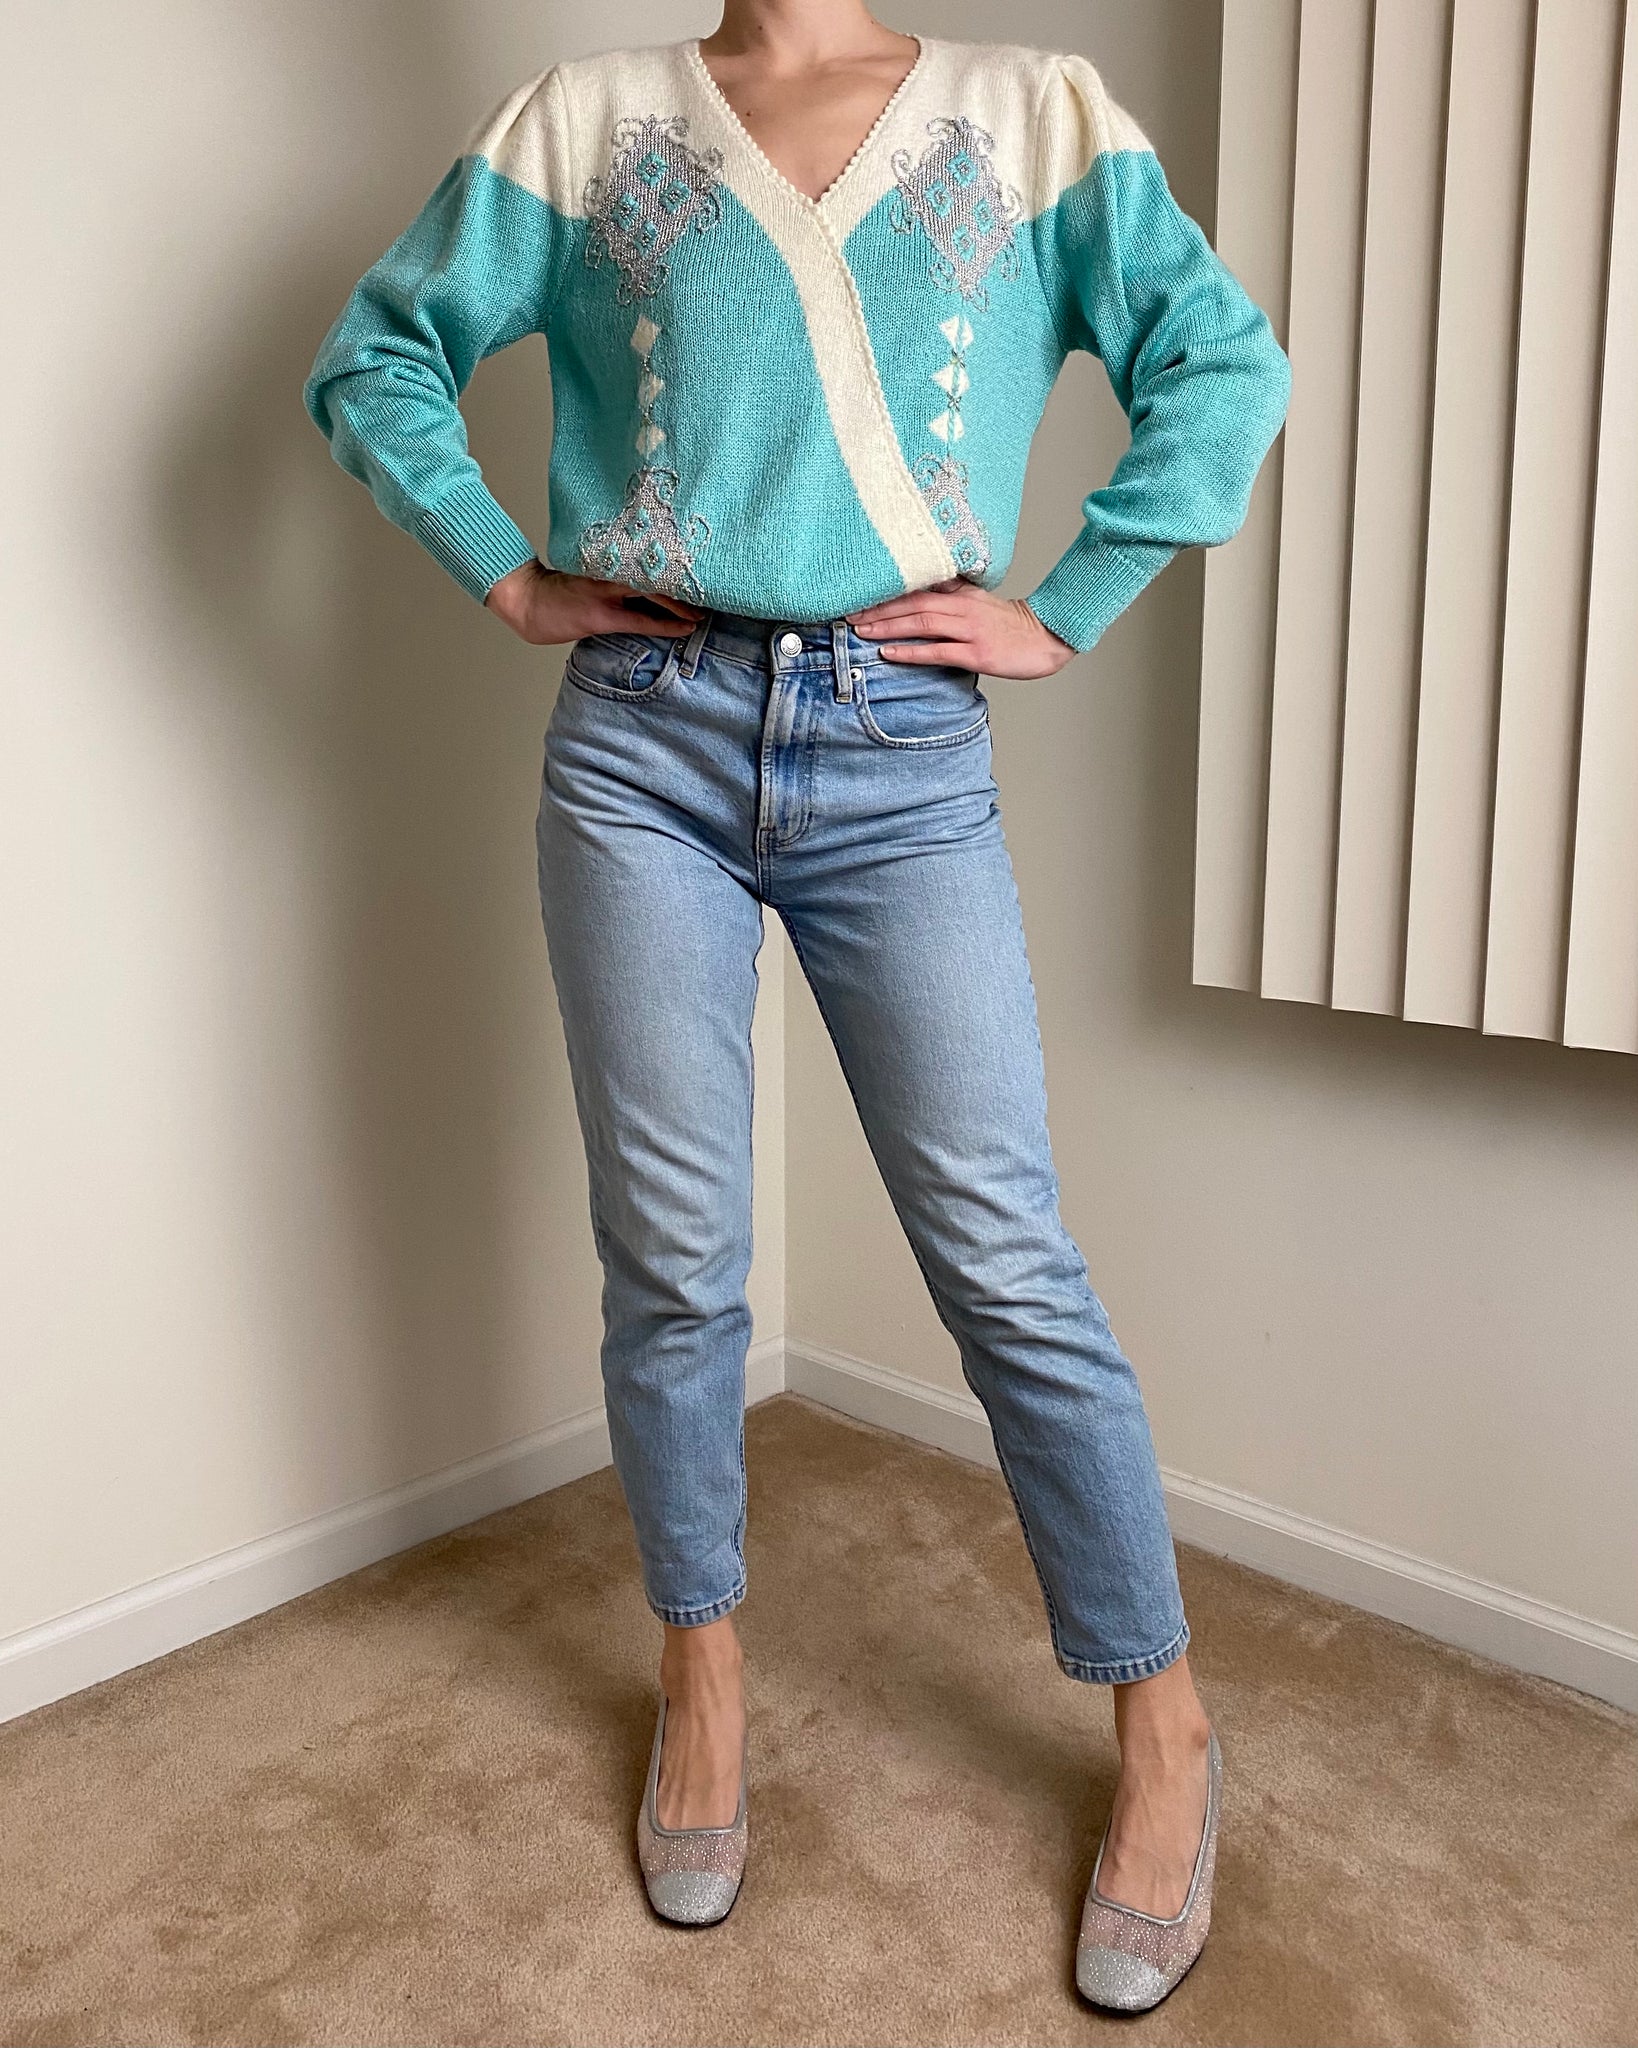 80s Jaclyn Smith Sweater (fits XS/S)